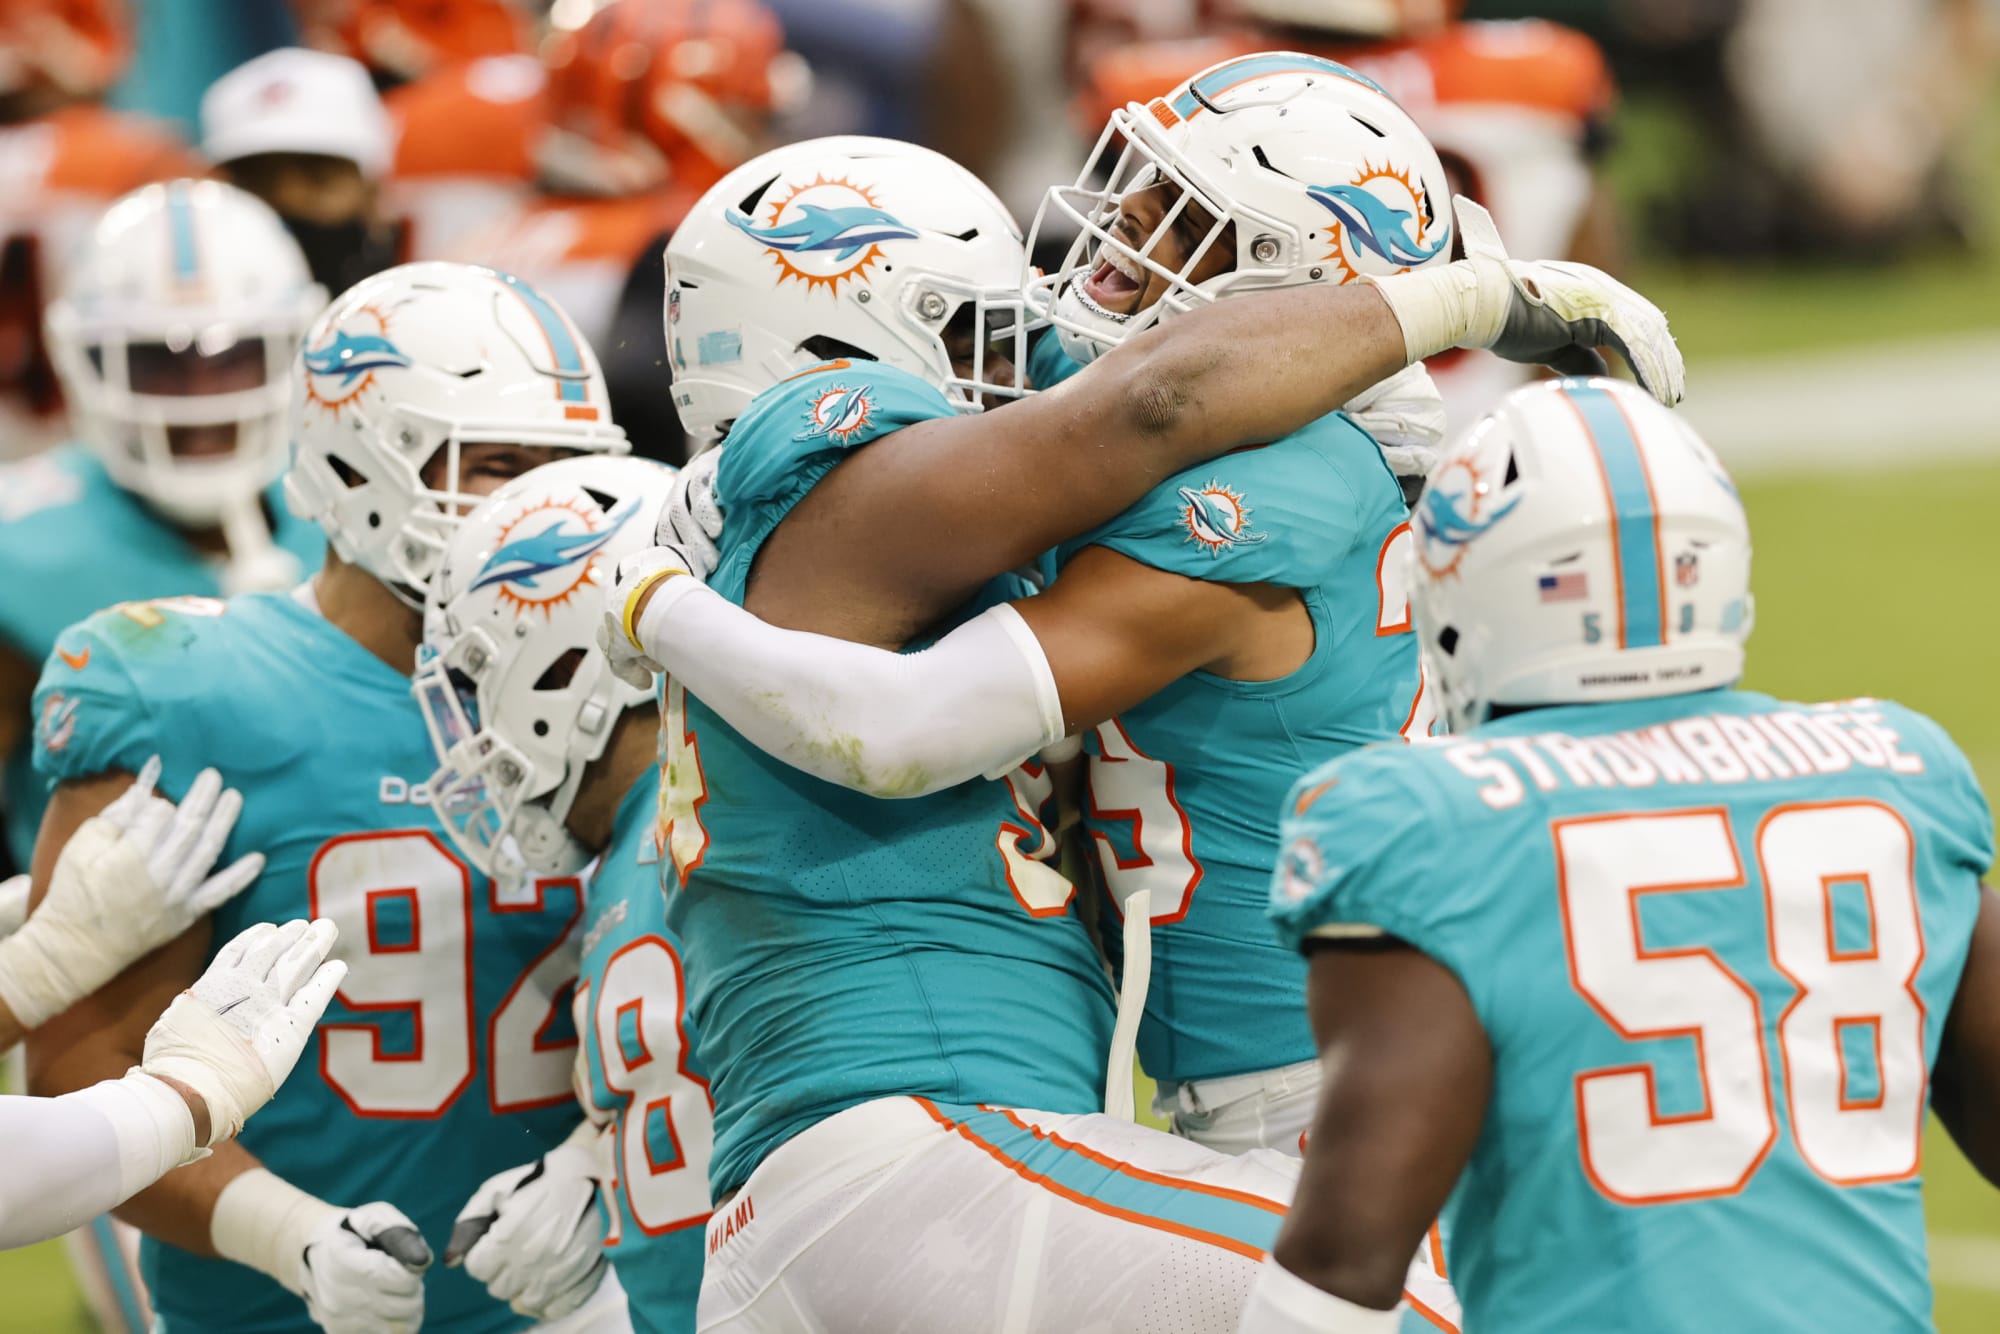 Turnovers, ejections, sacks, highlight Miami Dolphins win